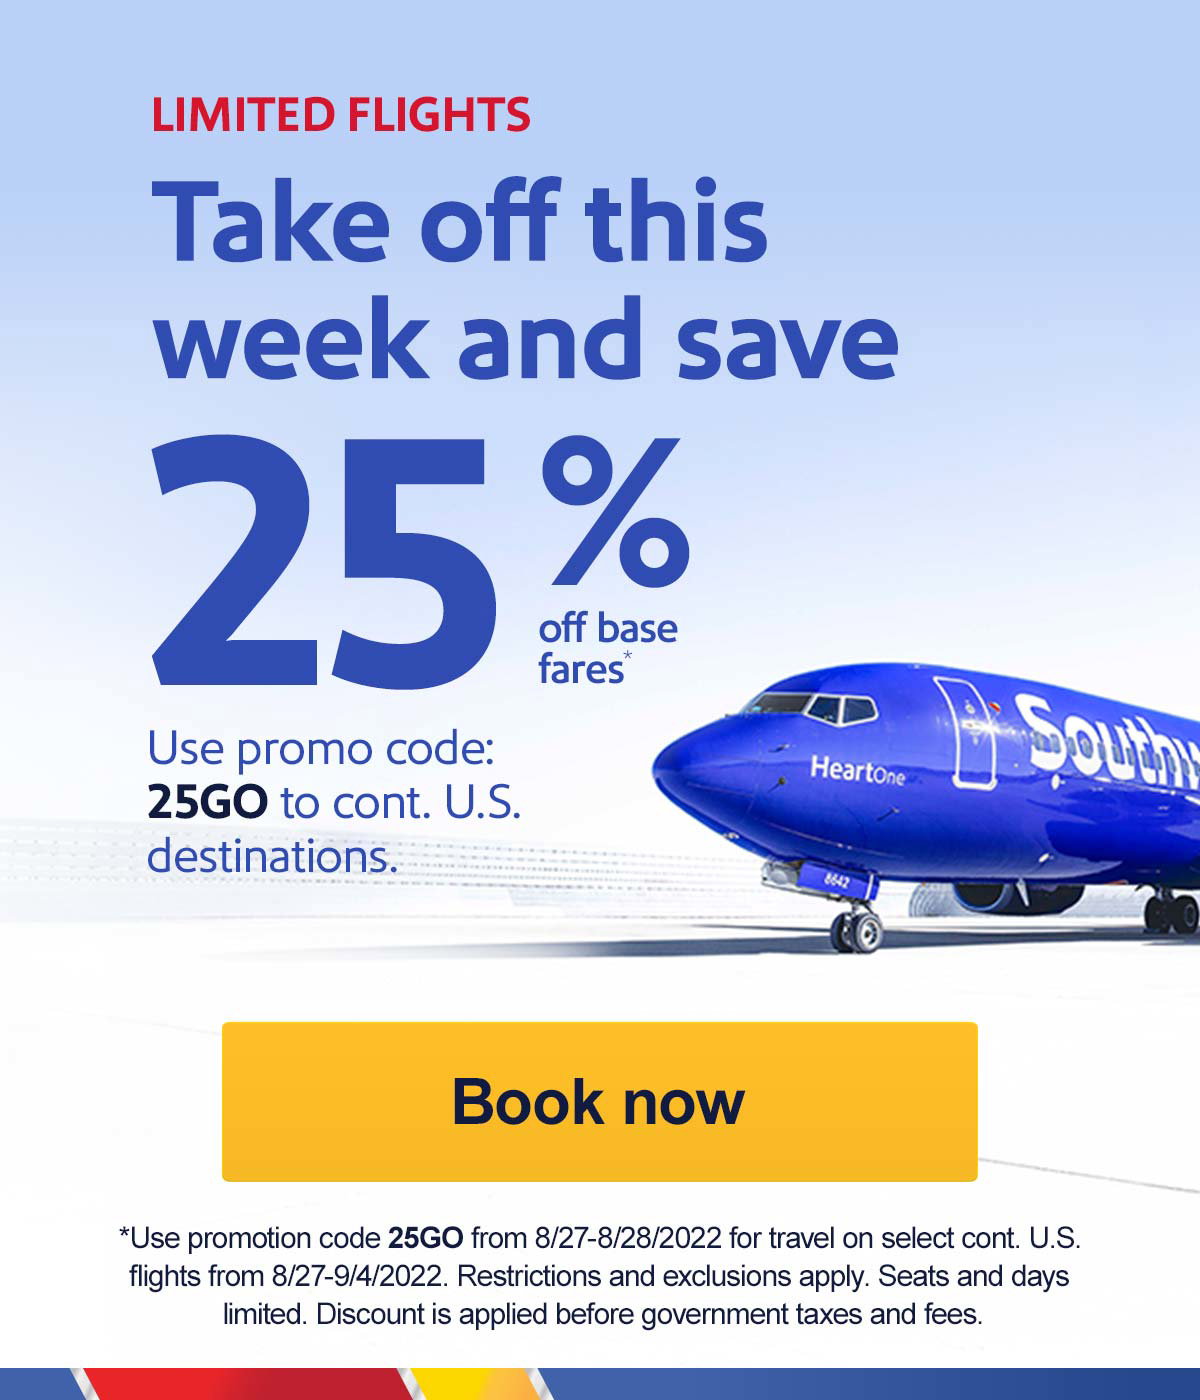 SOUTHWEST AIRLINES CELEBRATES WEEK OF WOW WITH 50% OFF LIMITED